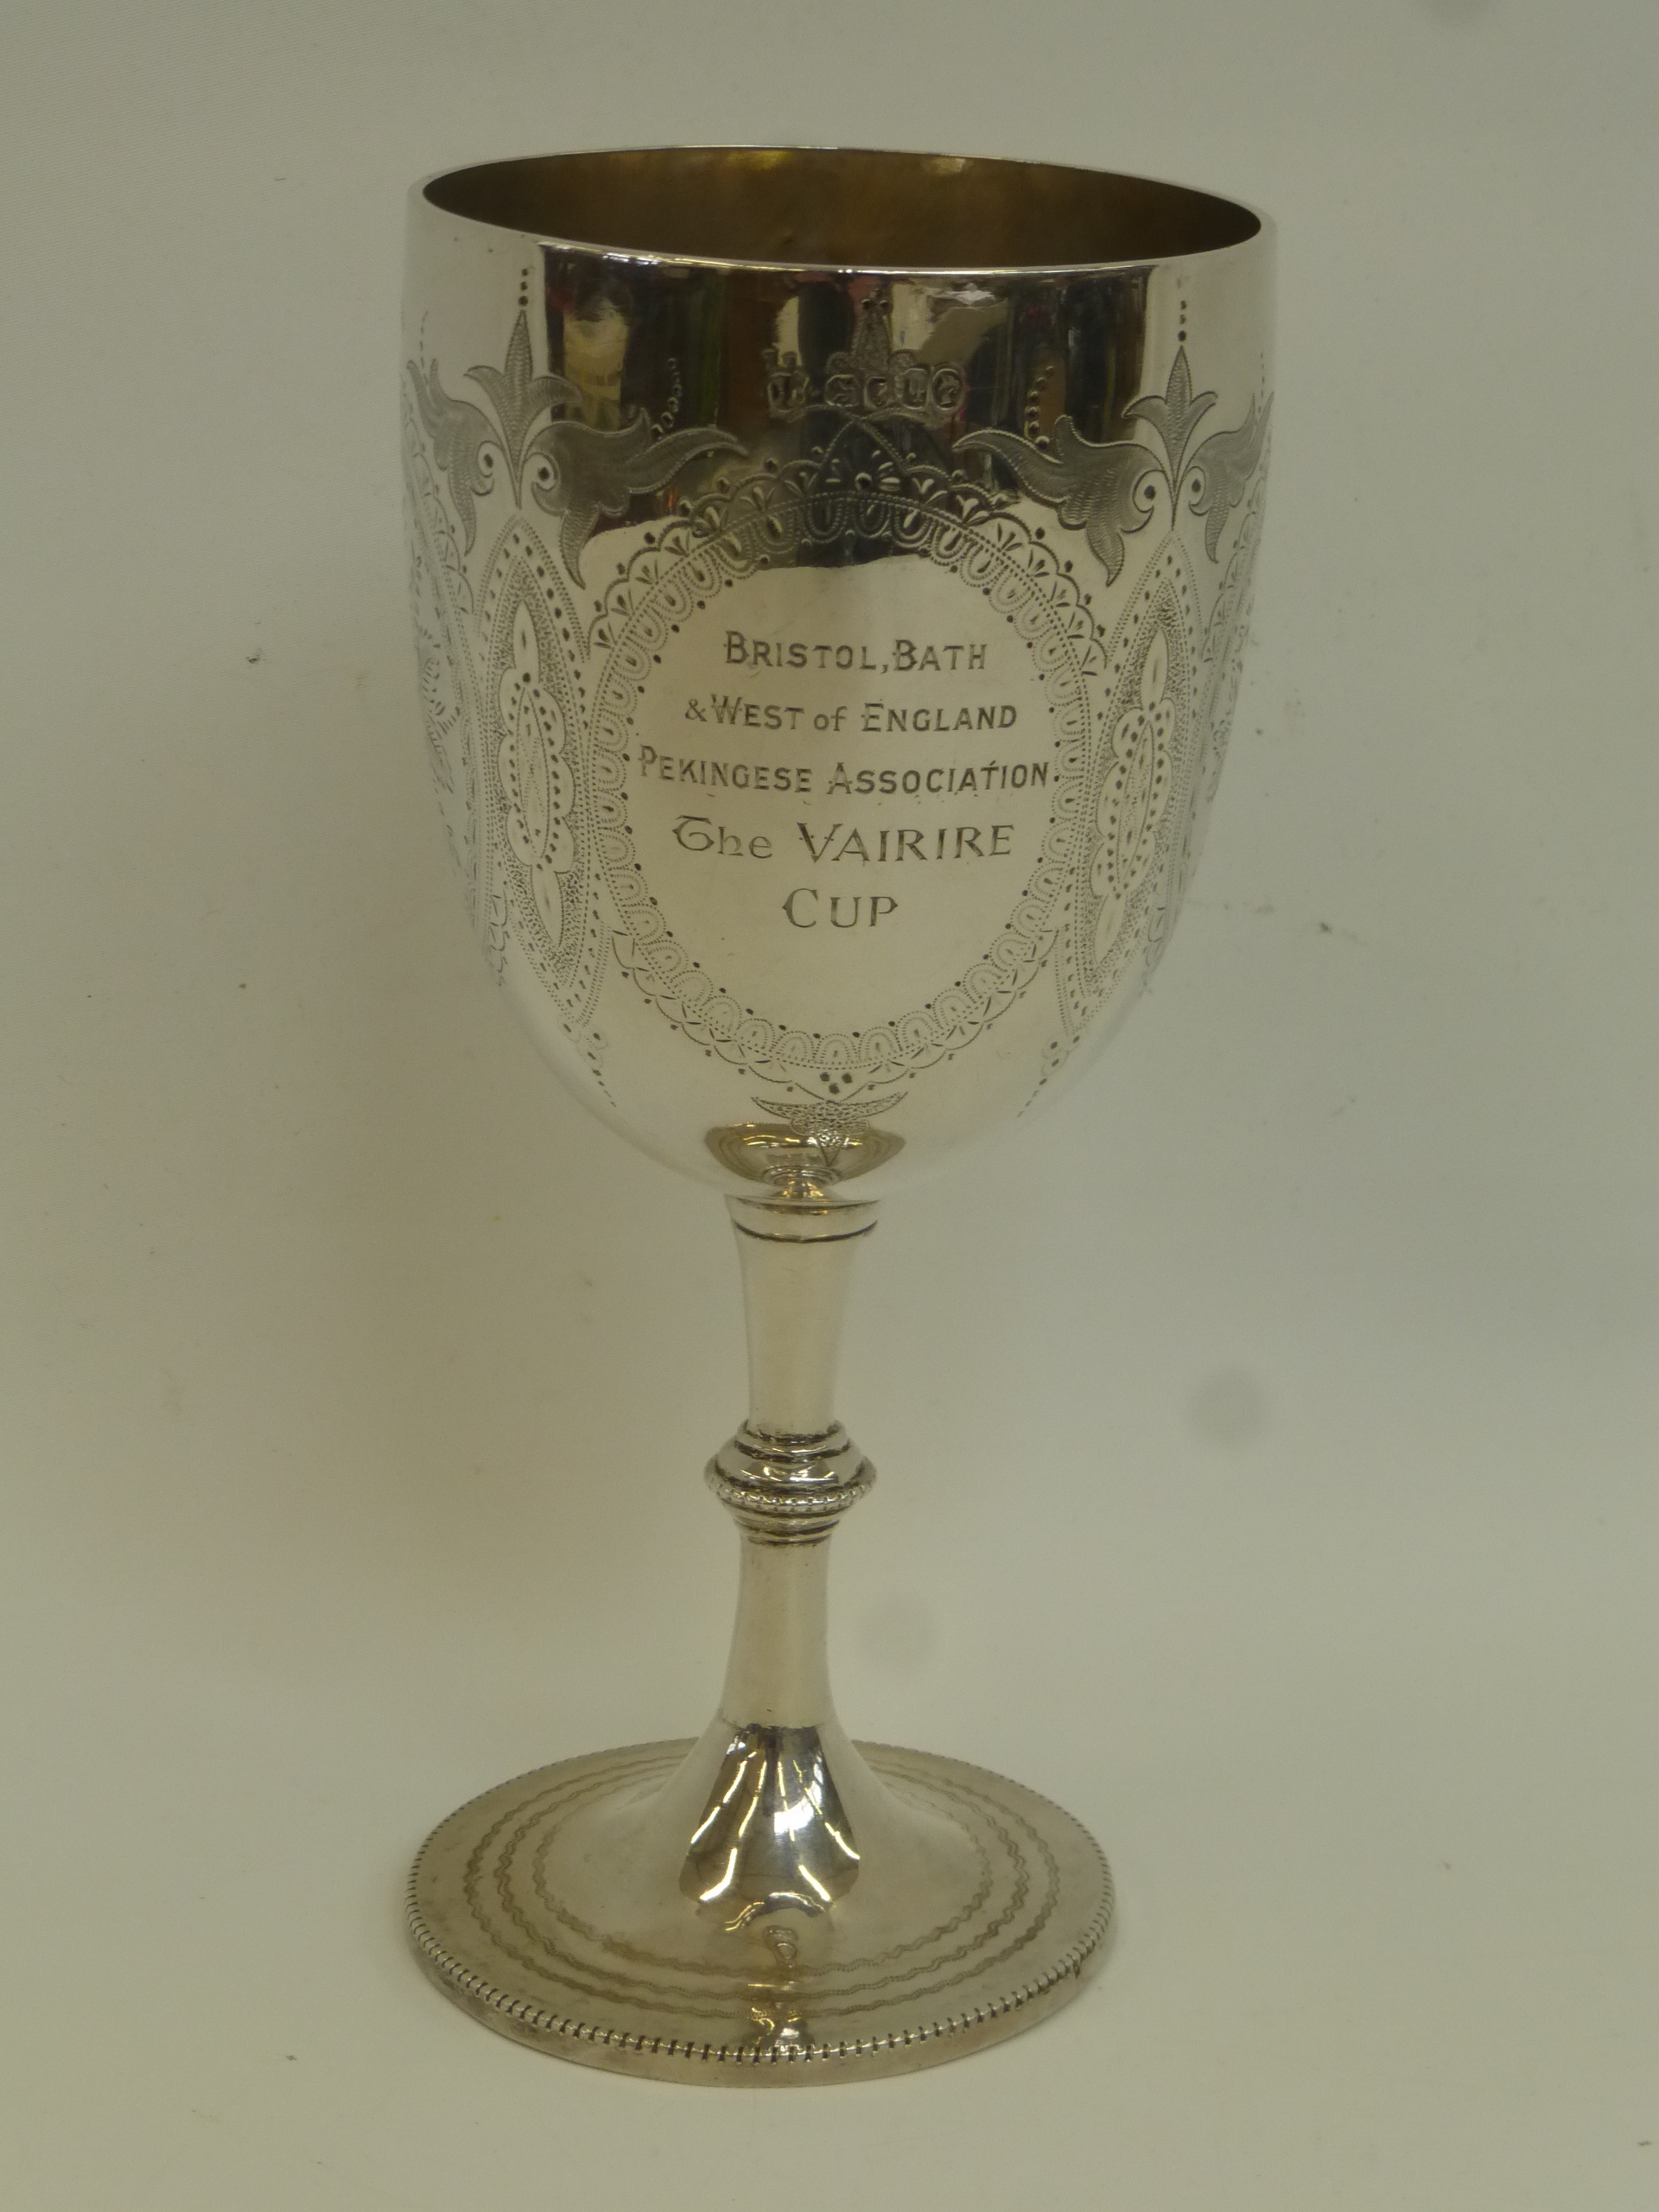 An engraved silver chalice with inscription Bristol, Bath and West England Pekingese Association "